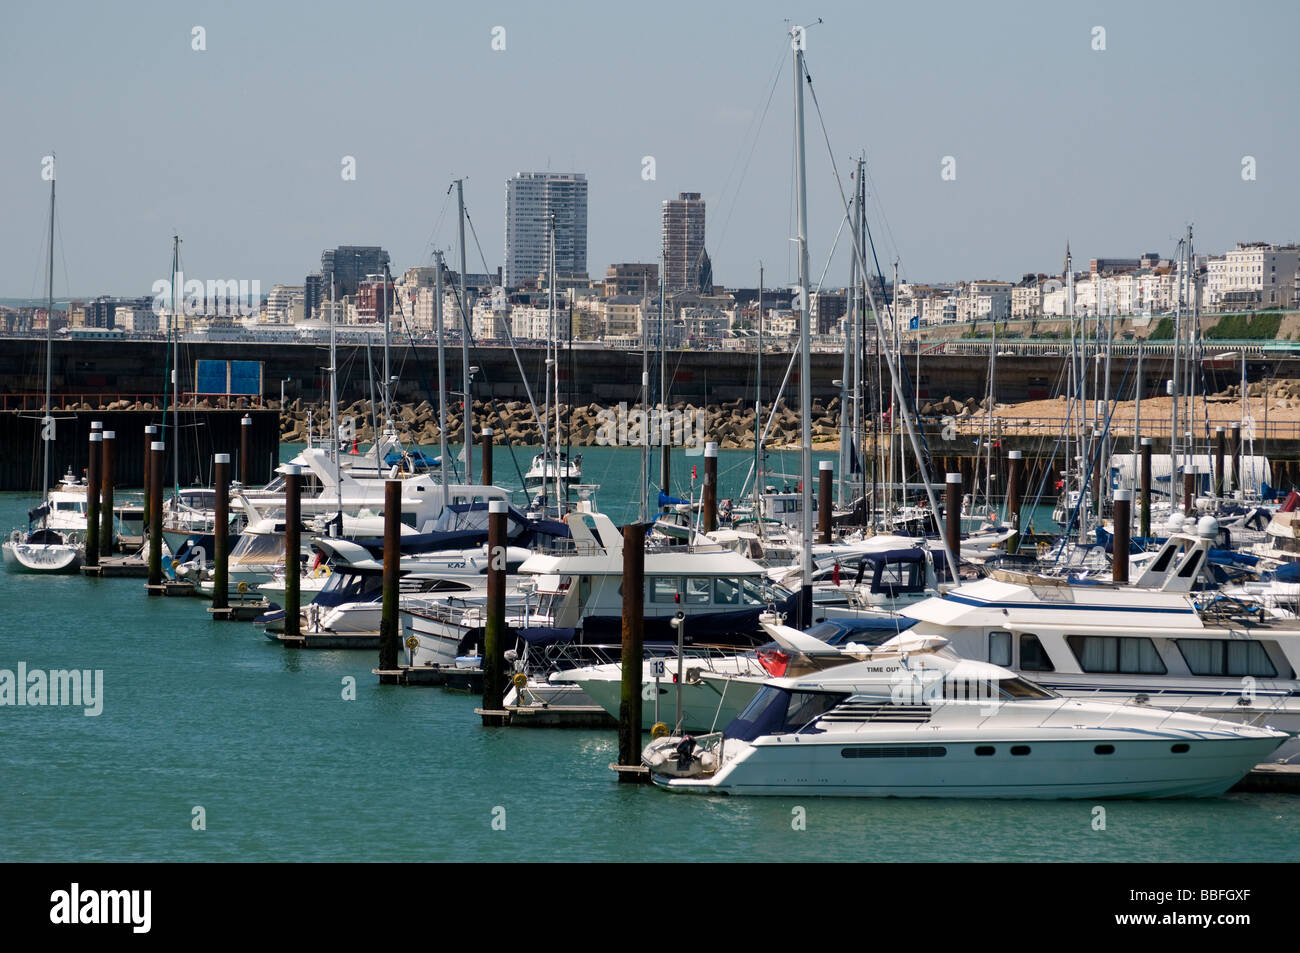 Yachts in Brigfhton Marina, with the Brighton skyline in the background. Stock Photo